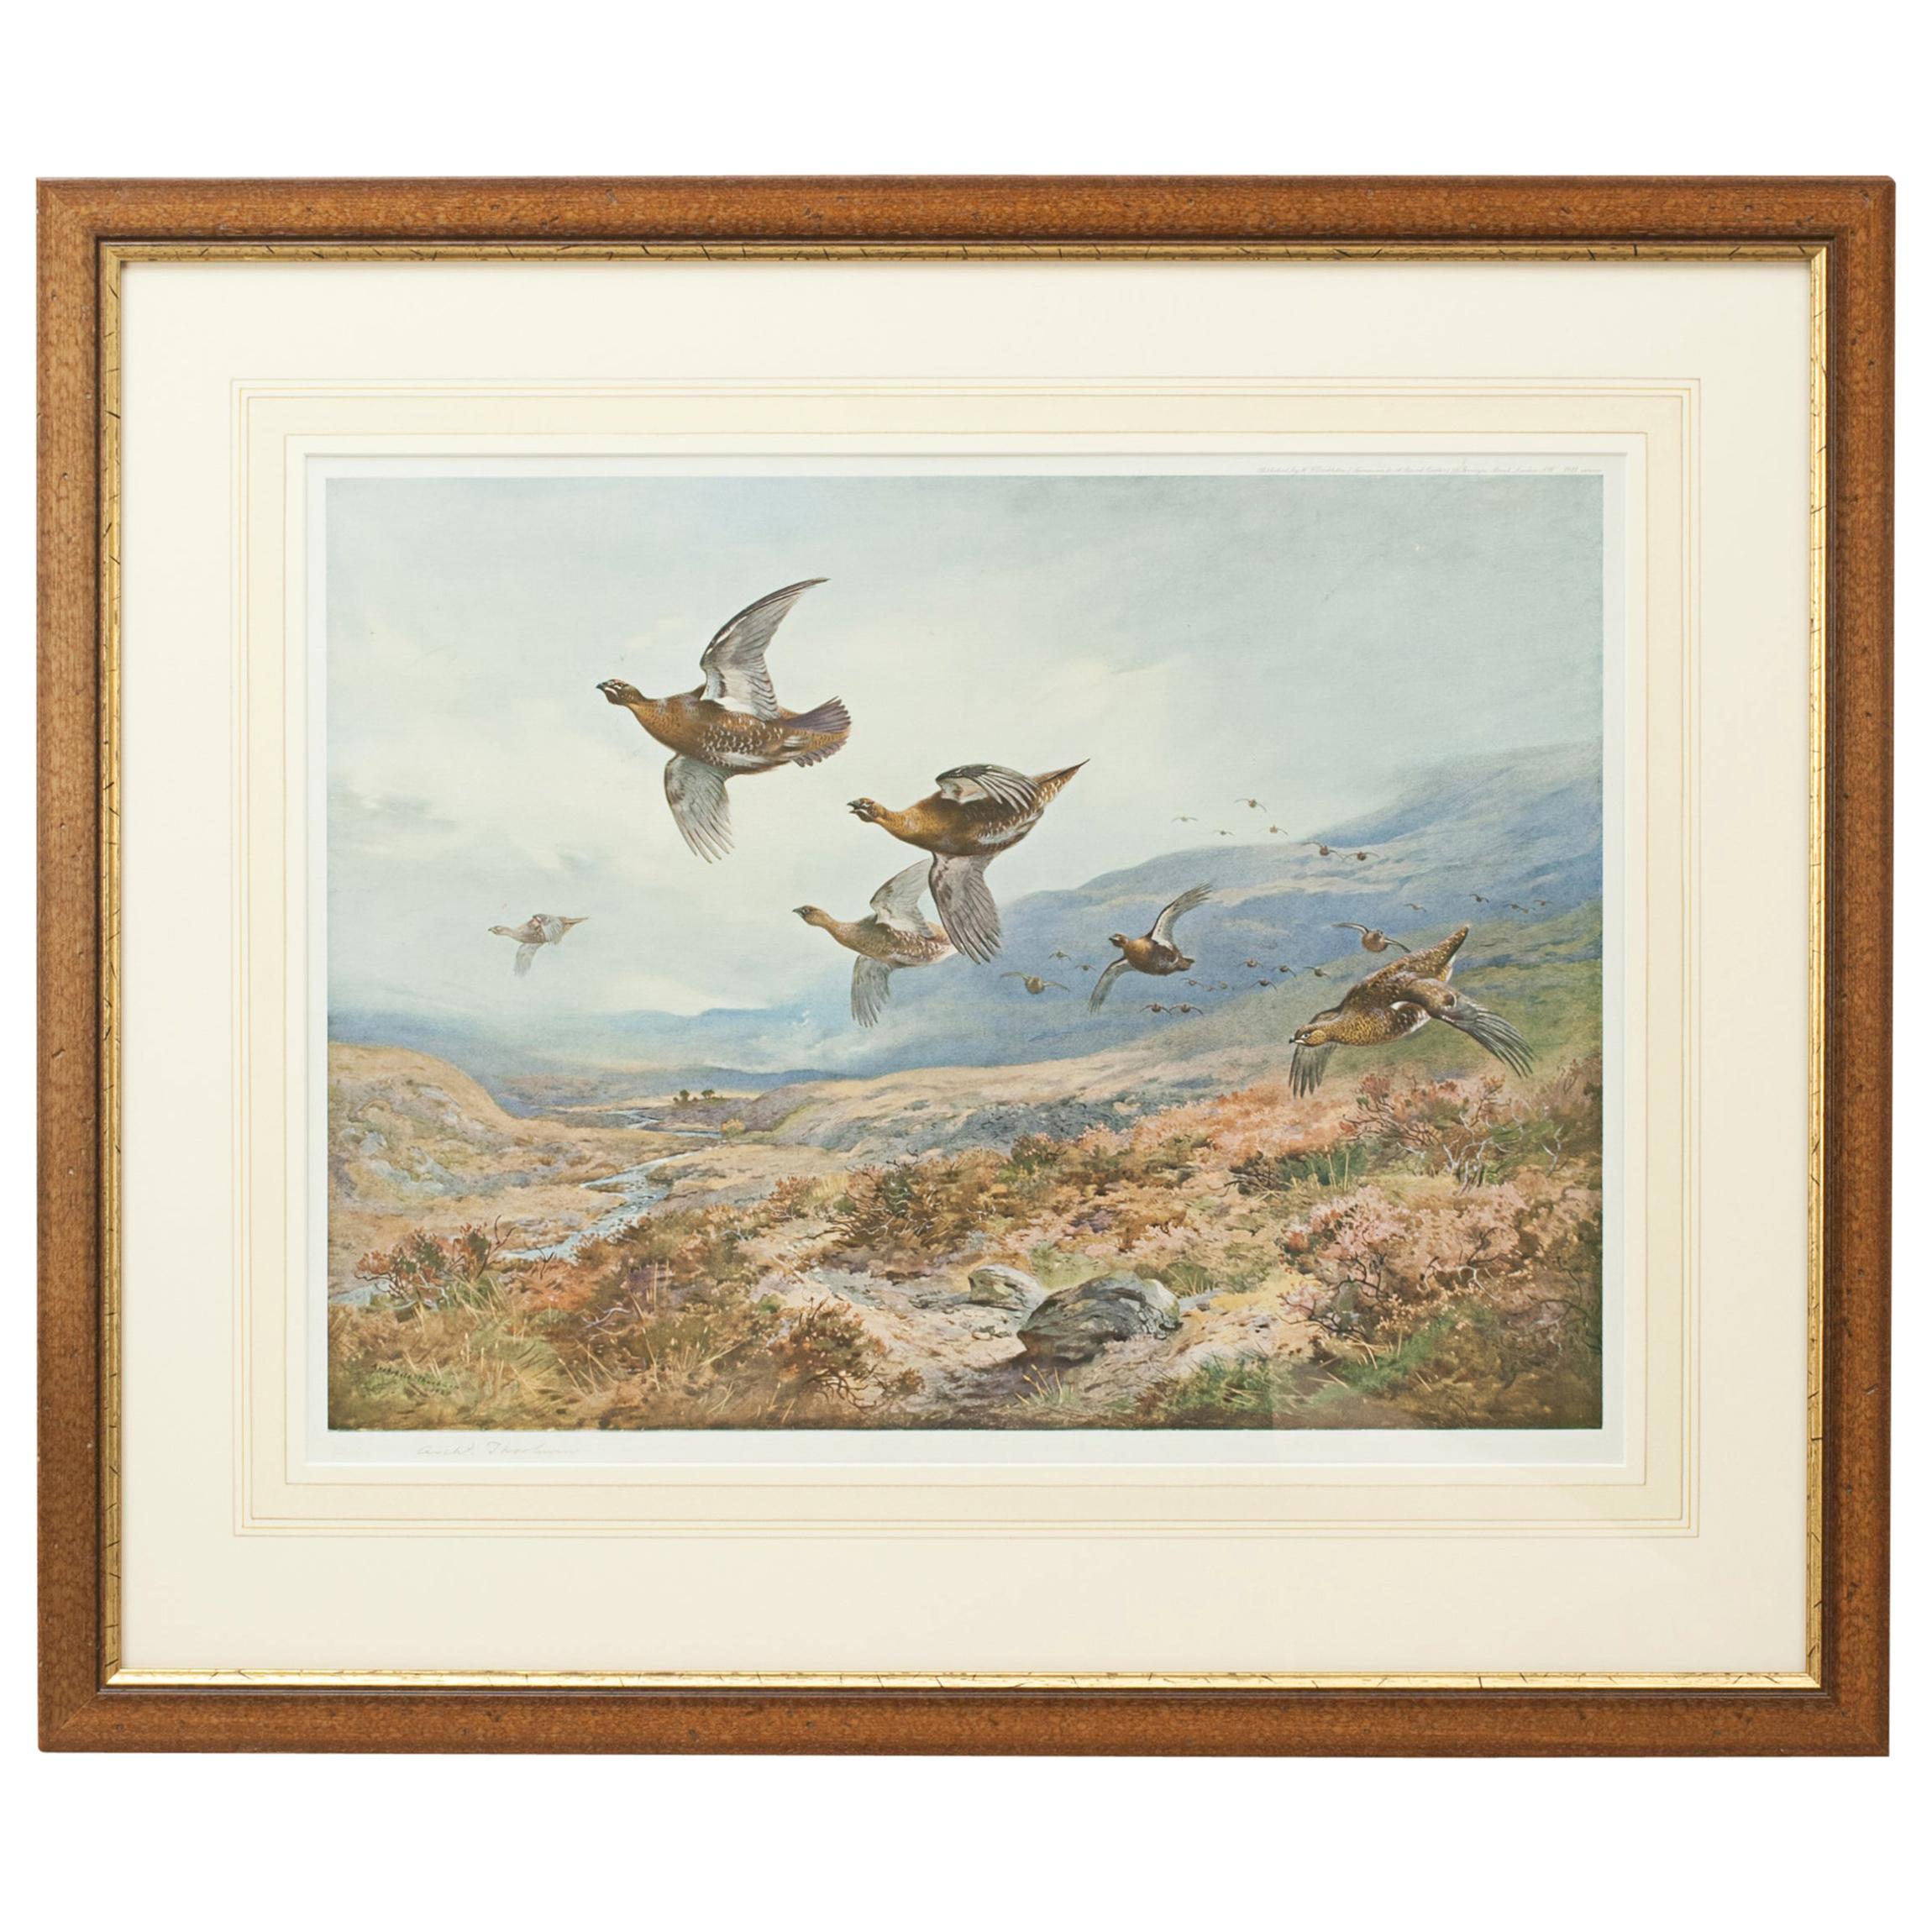 Antique Shooting Picture, Grouse Over the Moors by Archibald Thorburn